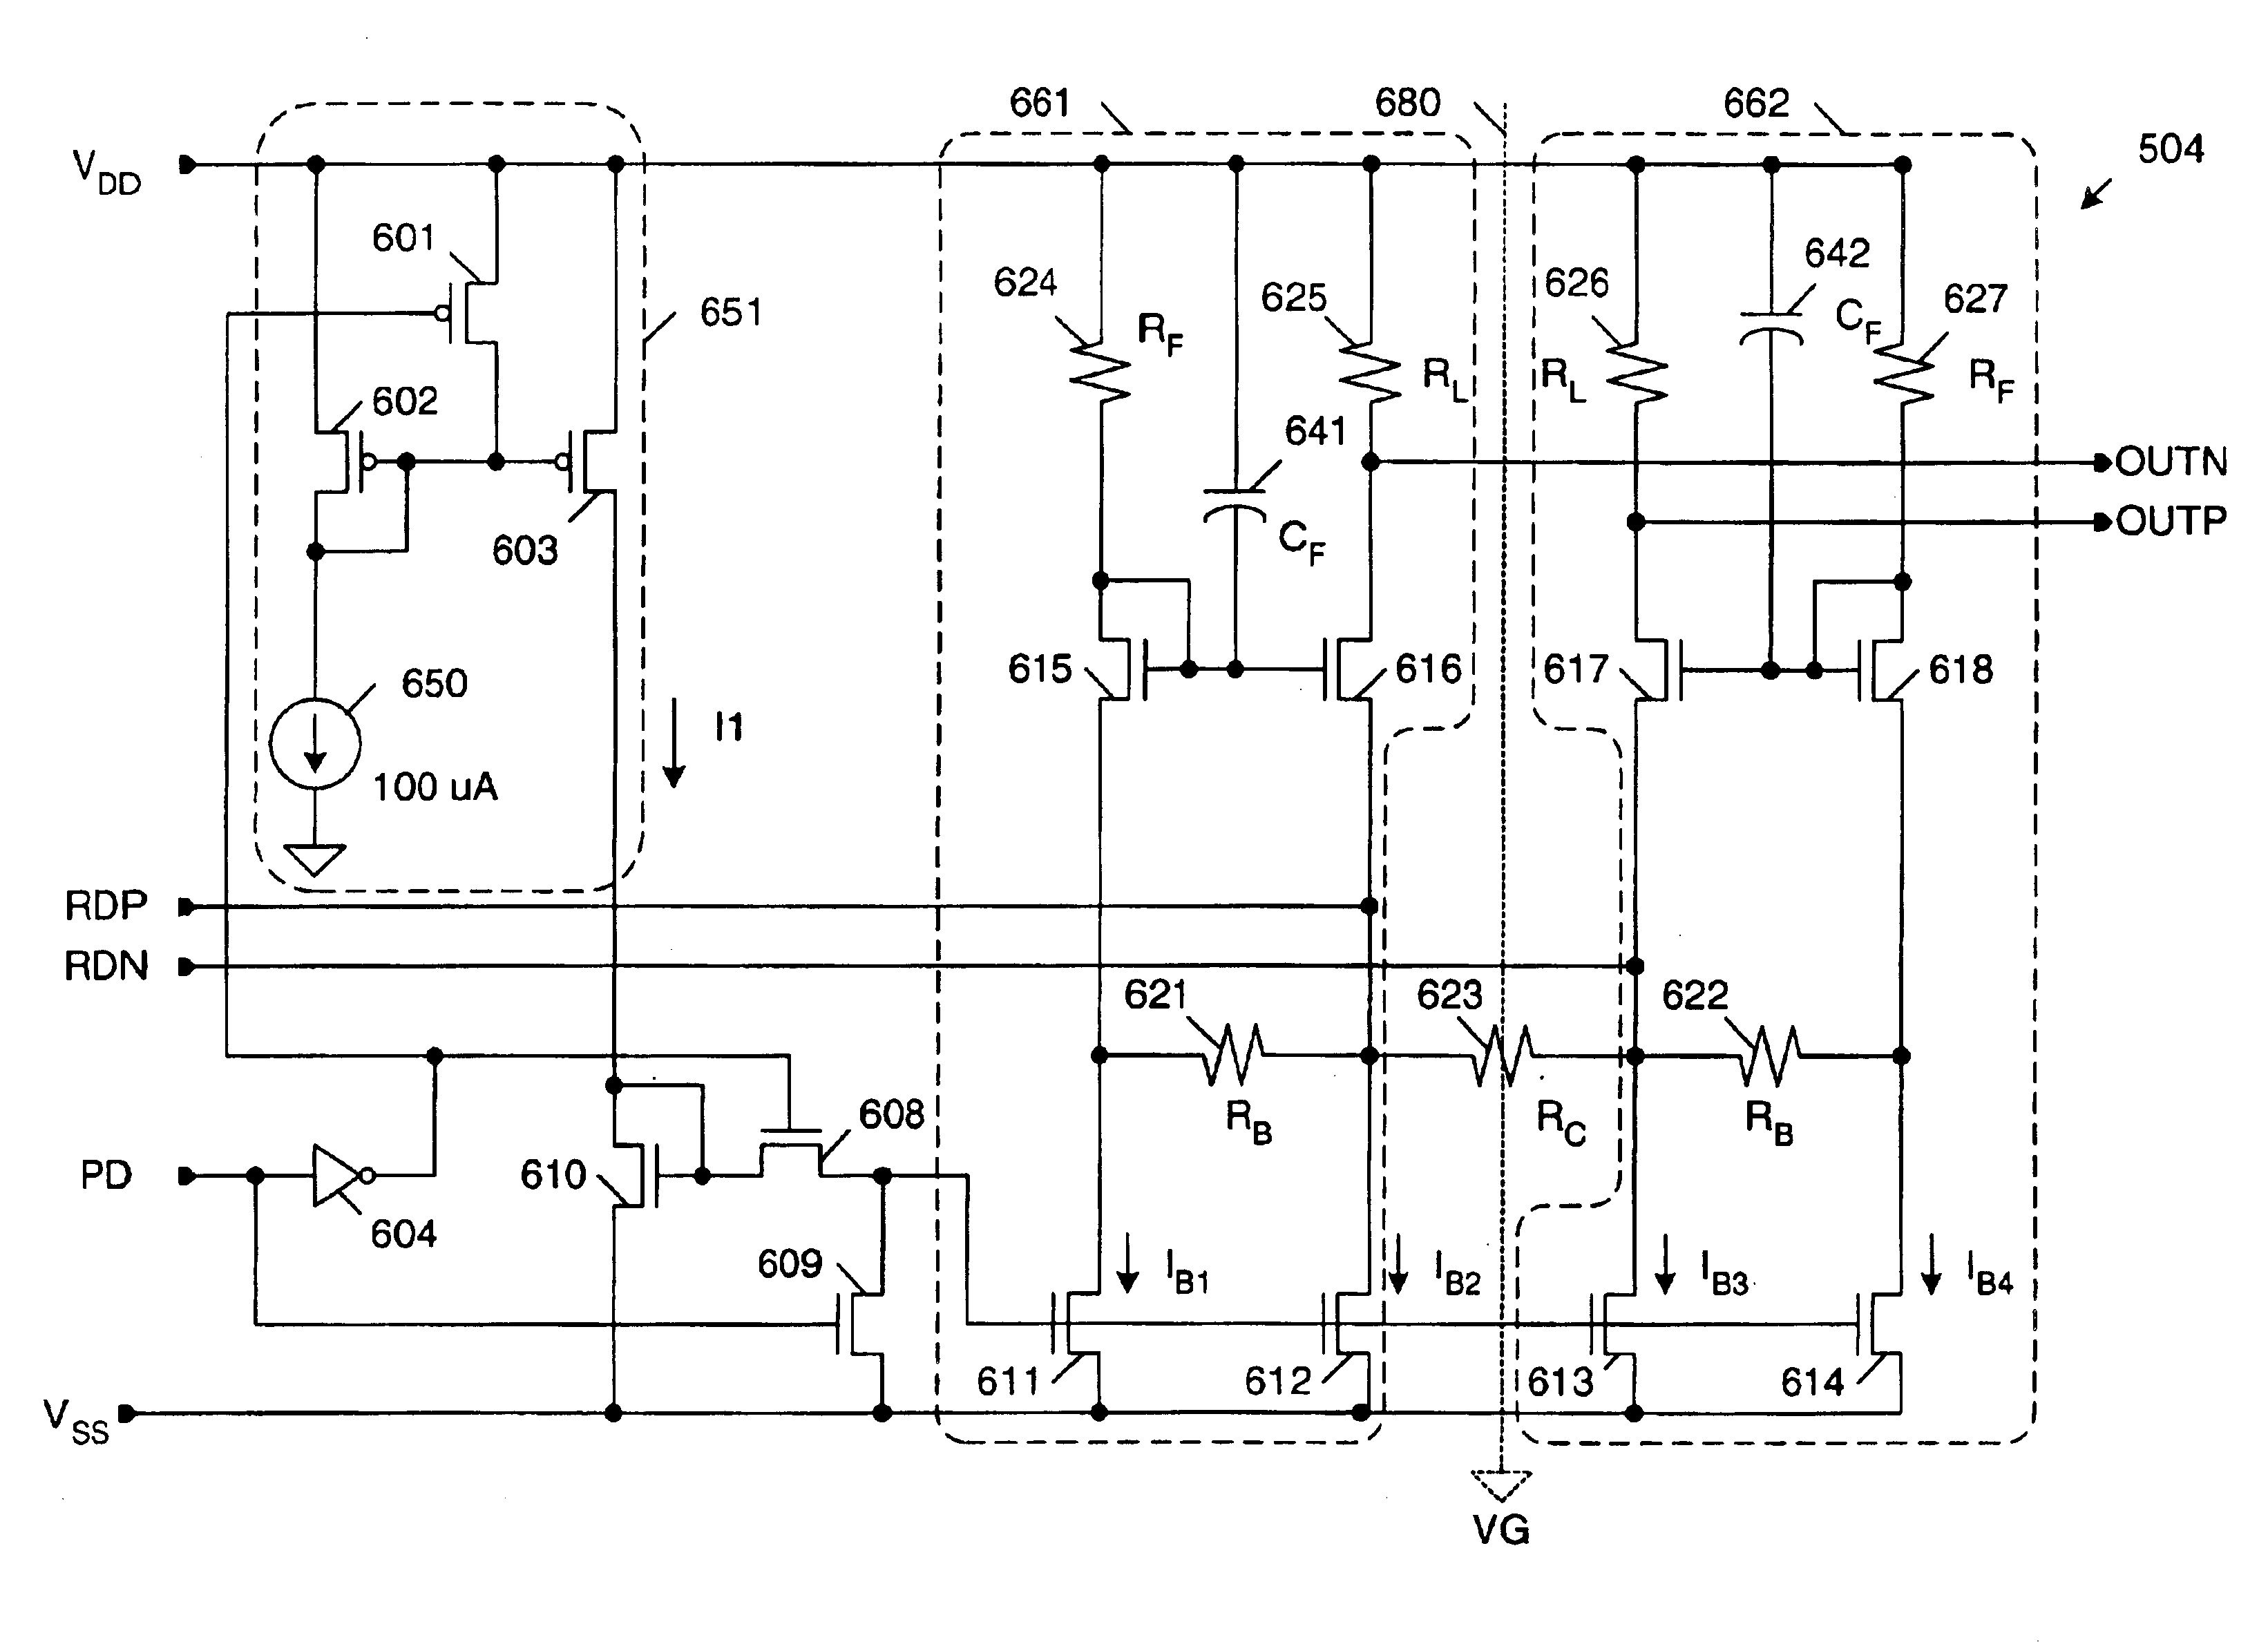 Self-biasing for common gate amplifier